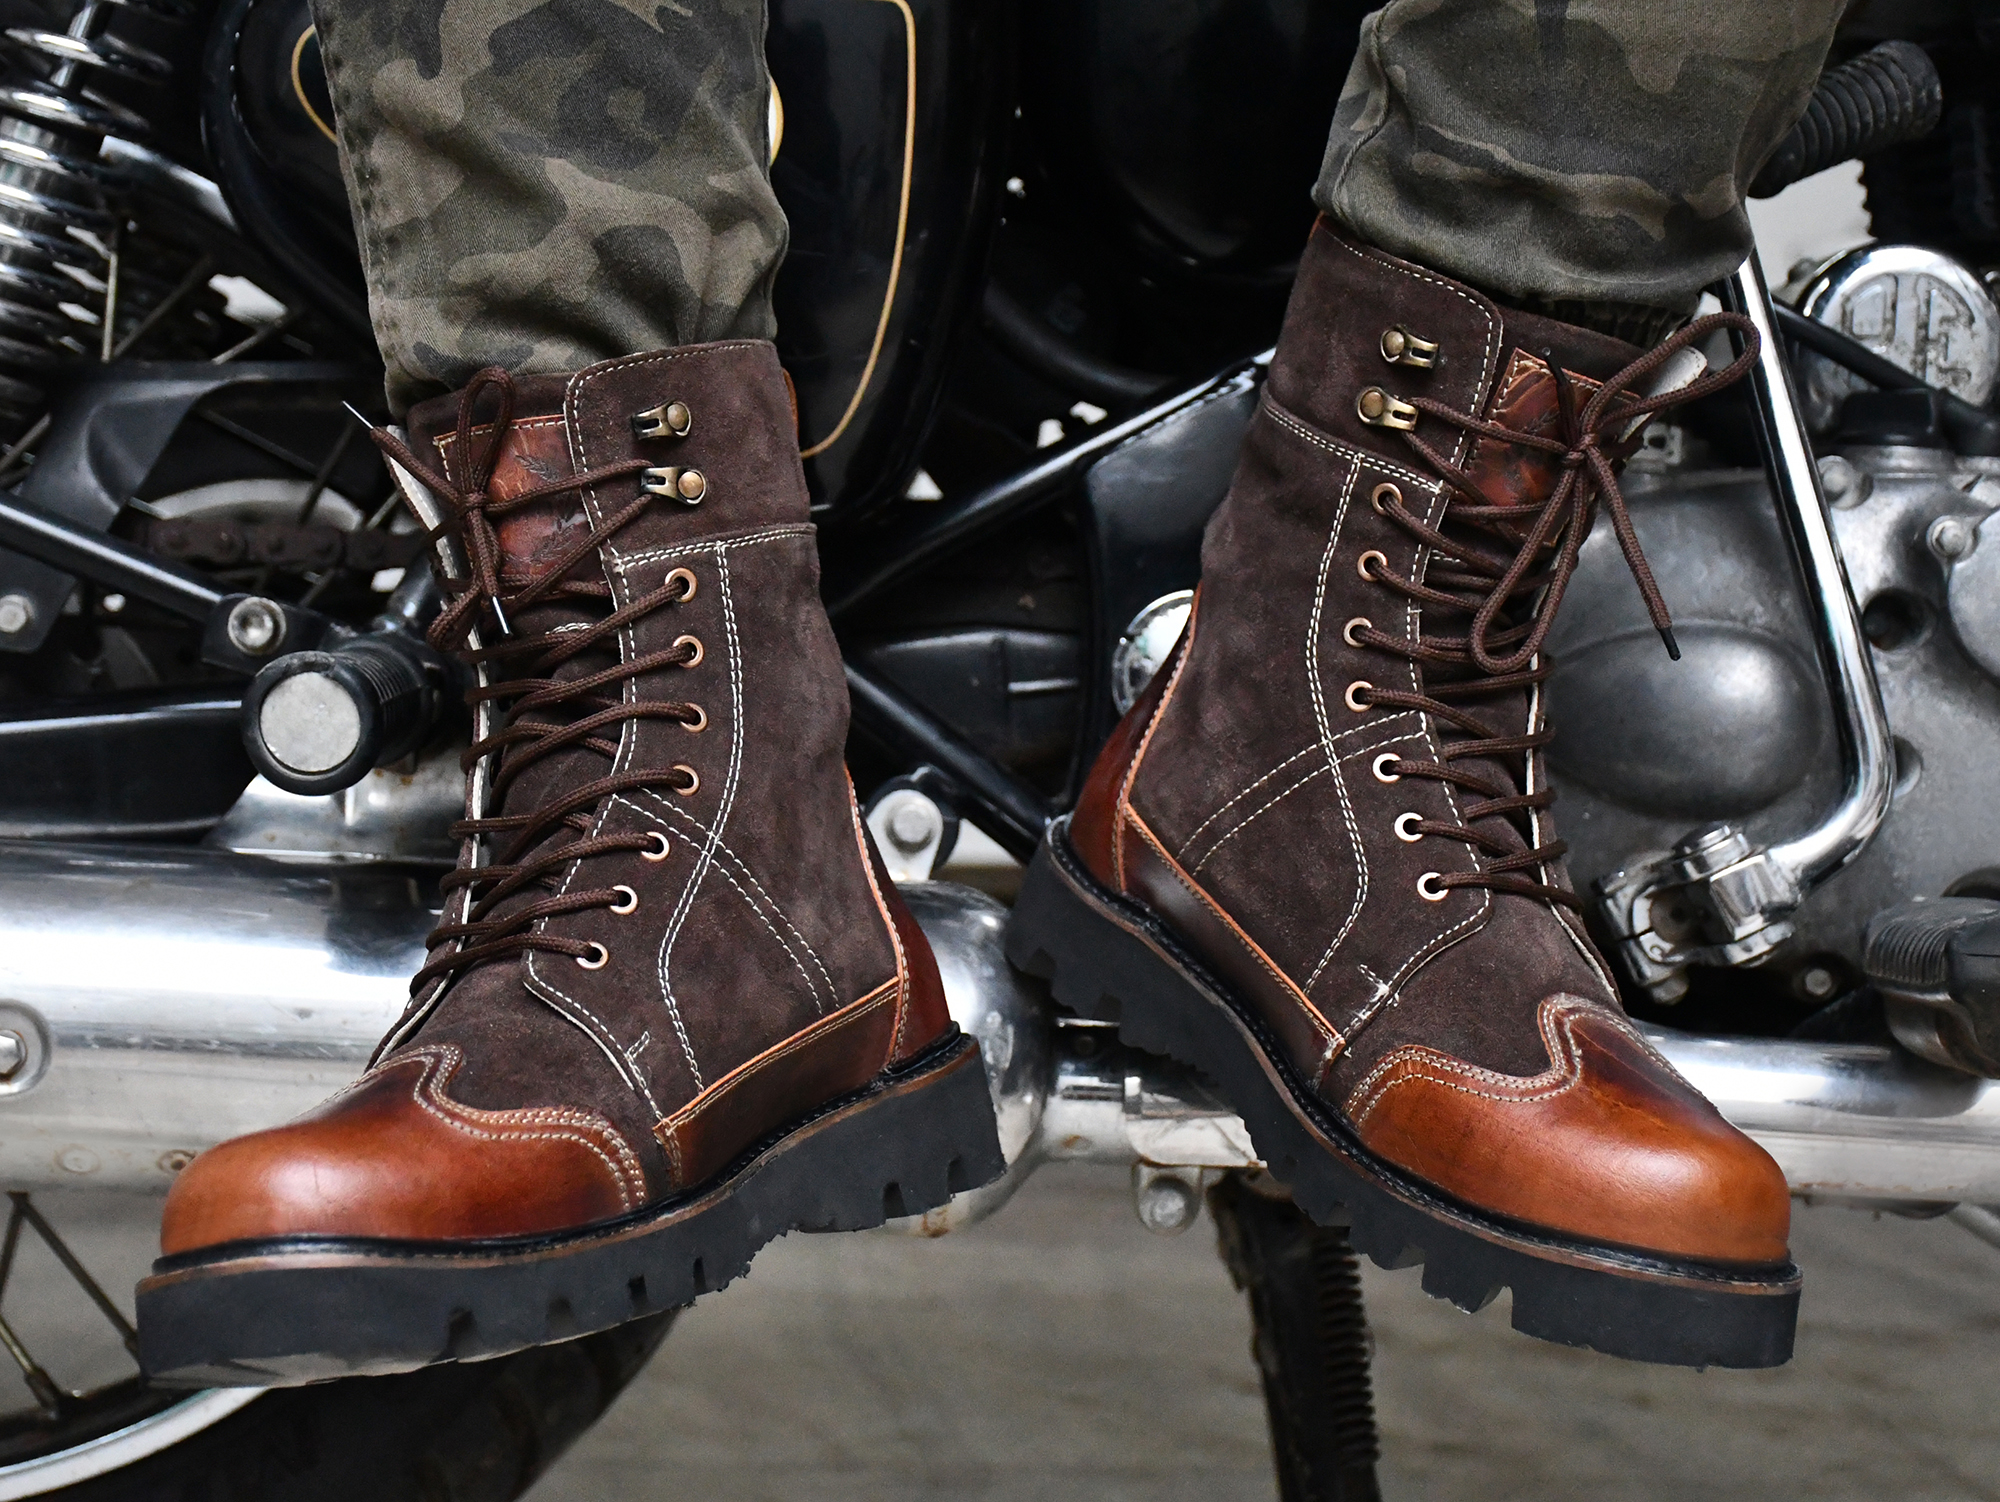 Biker Boots : Urban Rugged Brown & Suede leather boots for bikers with EVA Sole. Article :702E-Brown